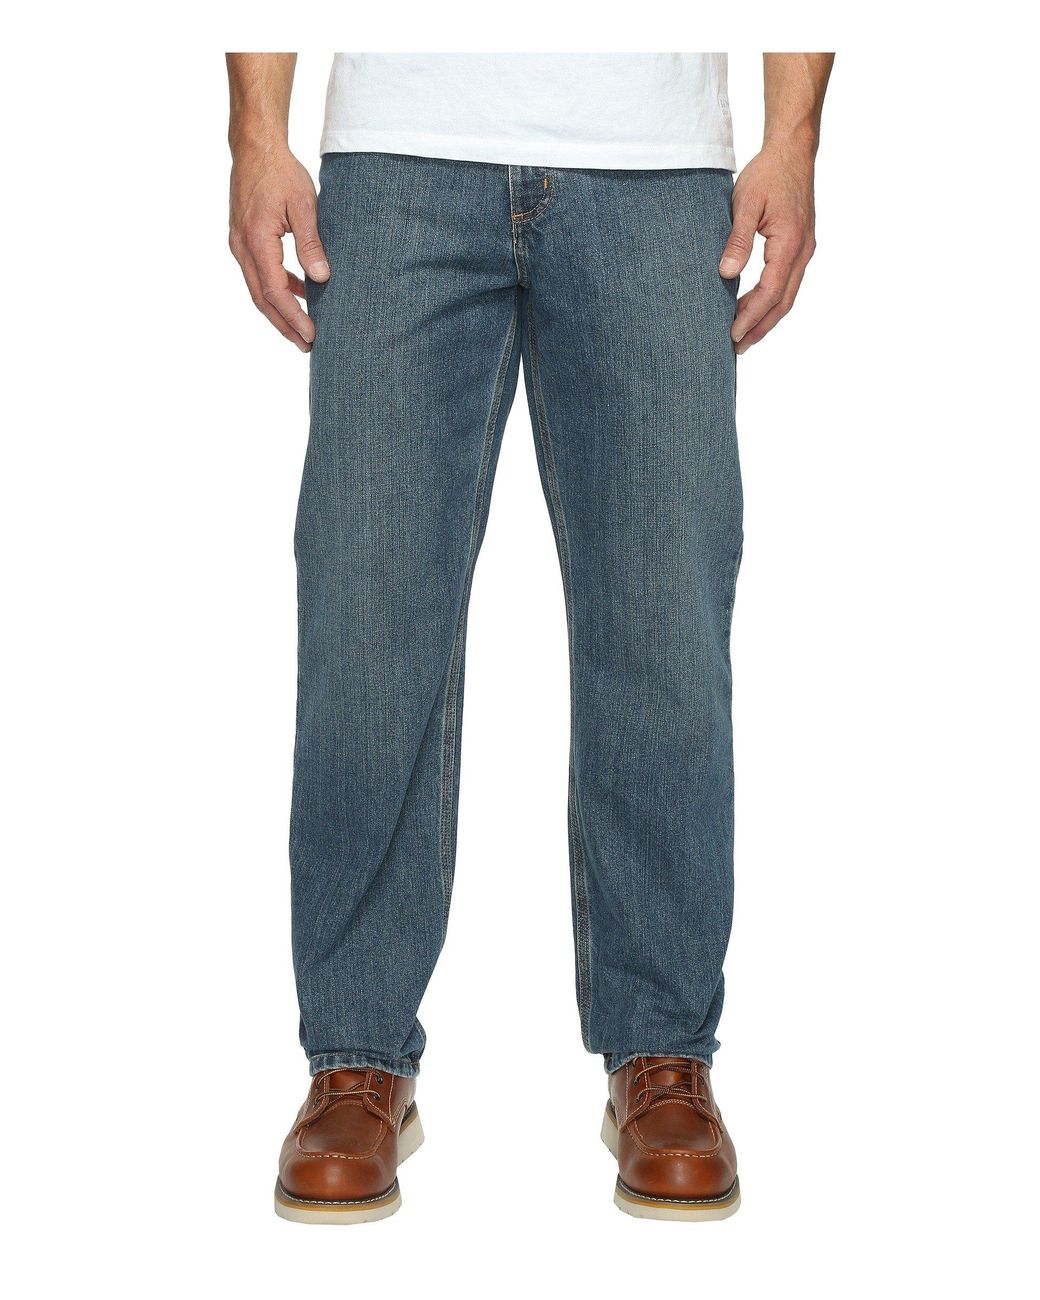 Carhartt Denim Relaxed Fit Holter Jeans in Blue for Men - Lyst